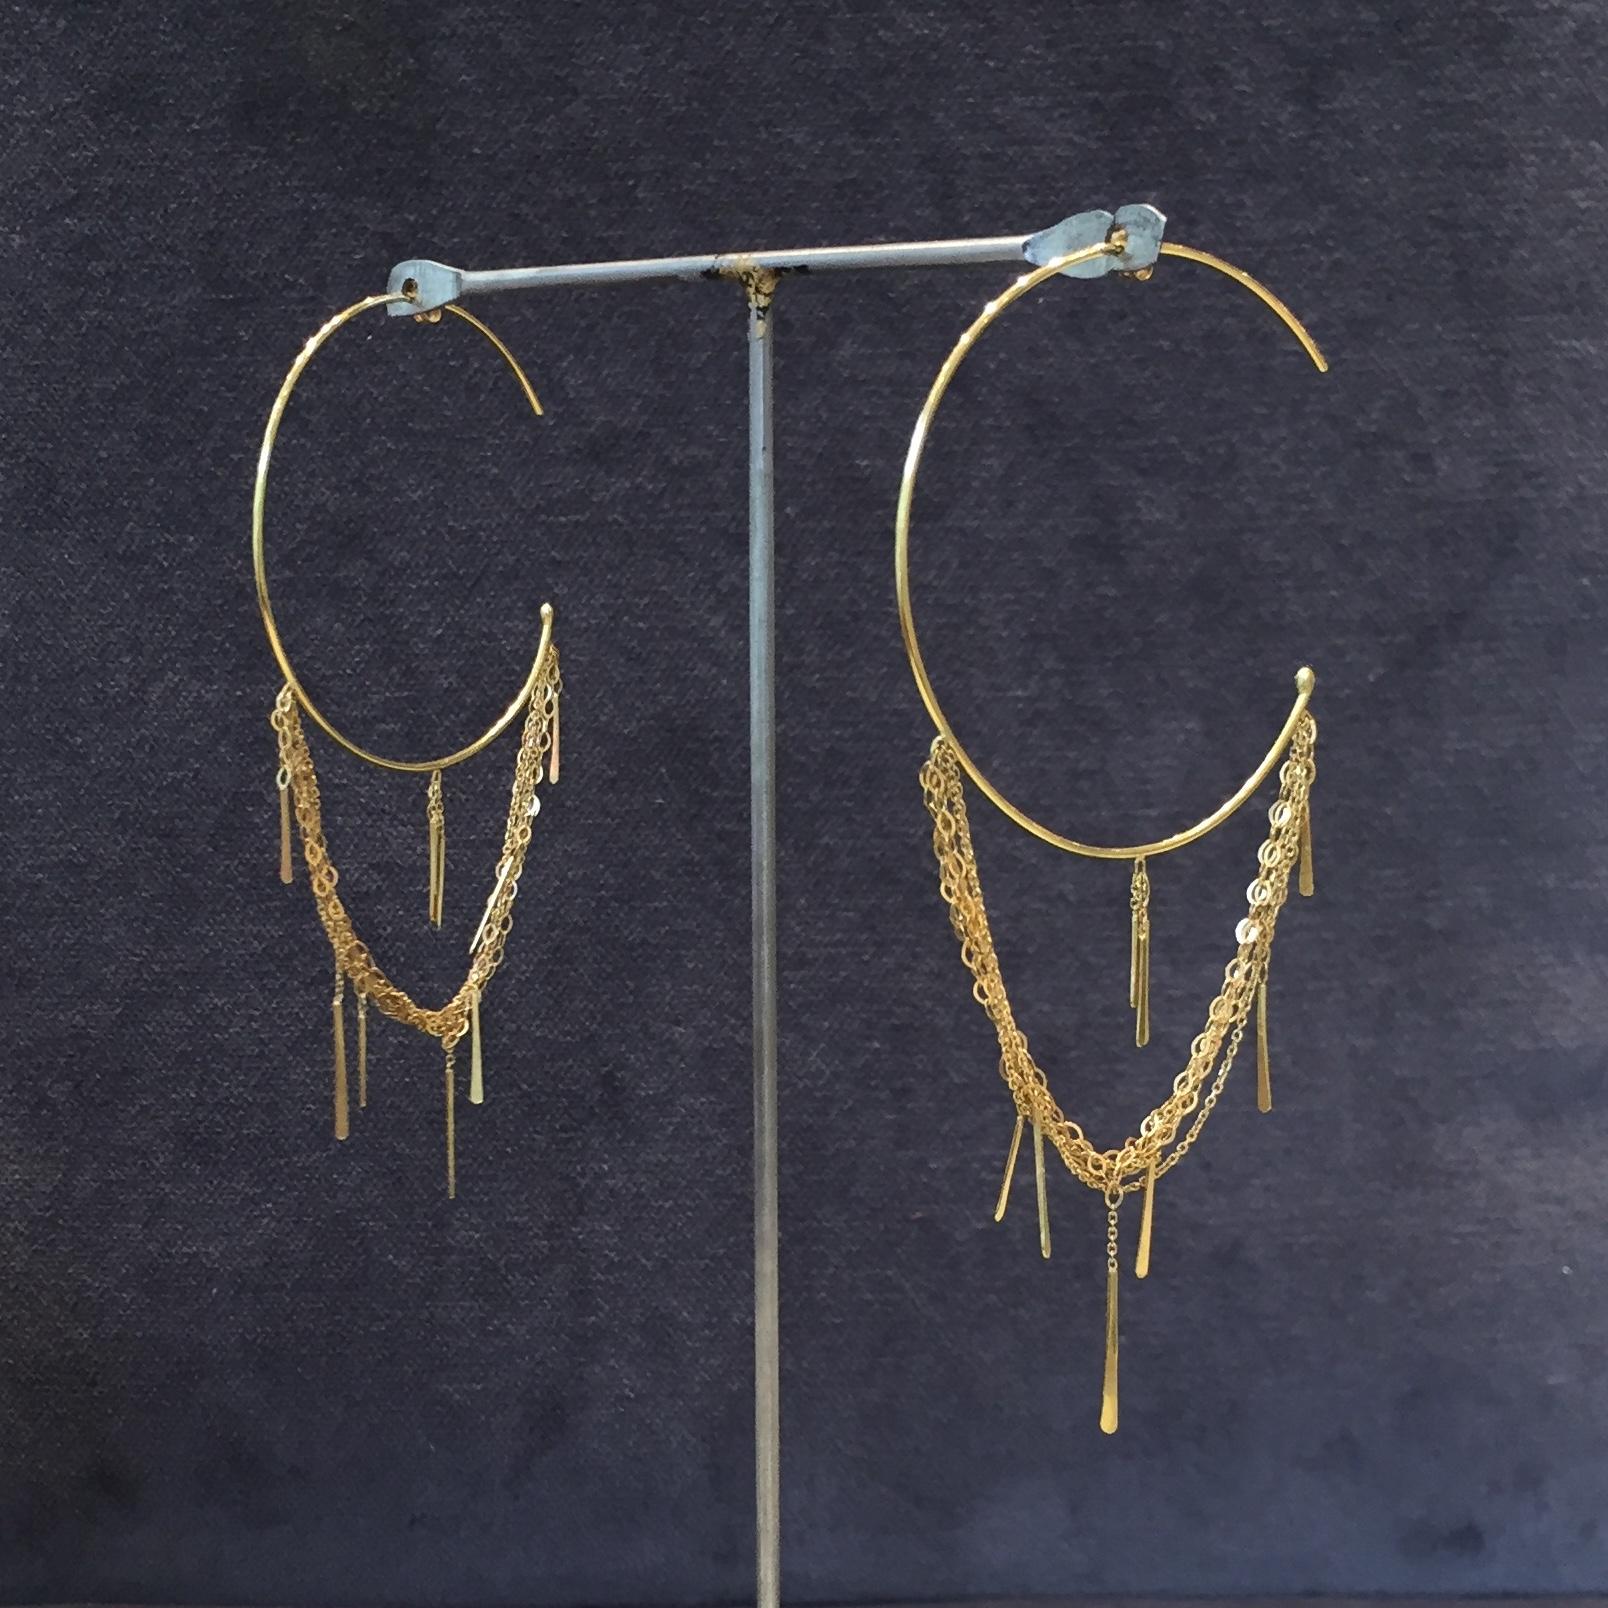 Contemporary Sweet Pea Sycamore 18k Yellow Gold Large Hoop Earrings With Layered Chains For Sale